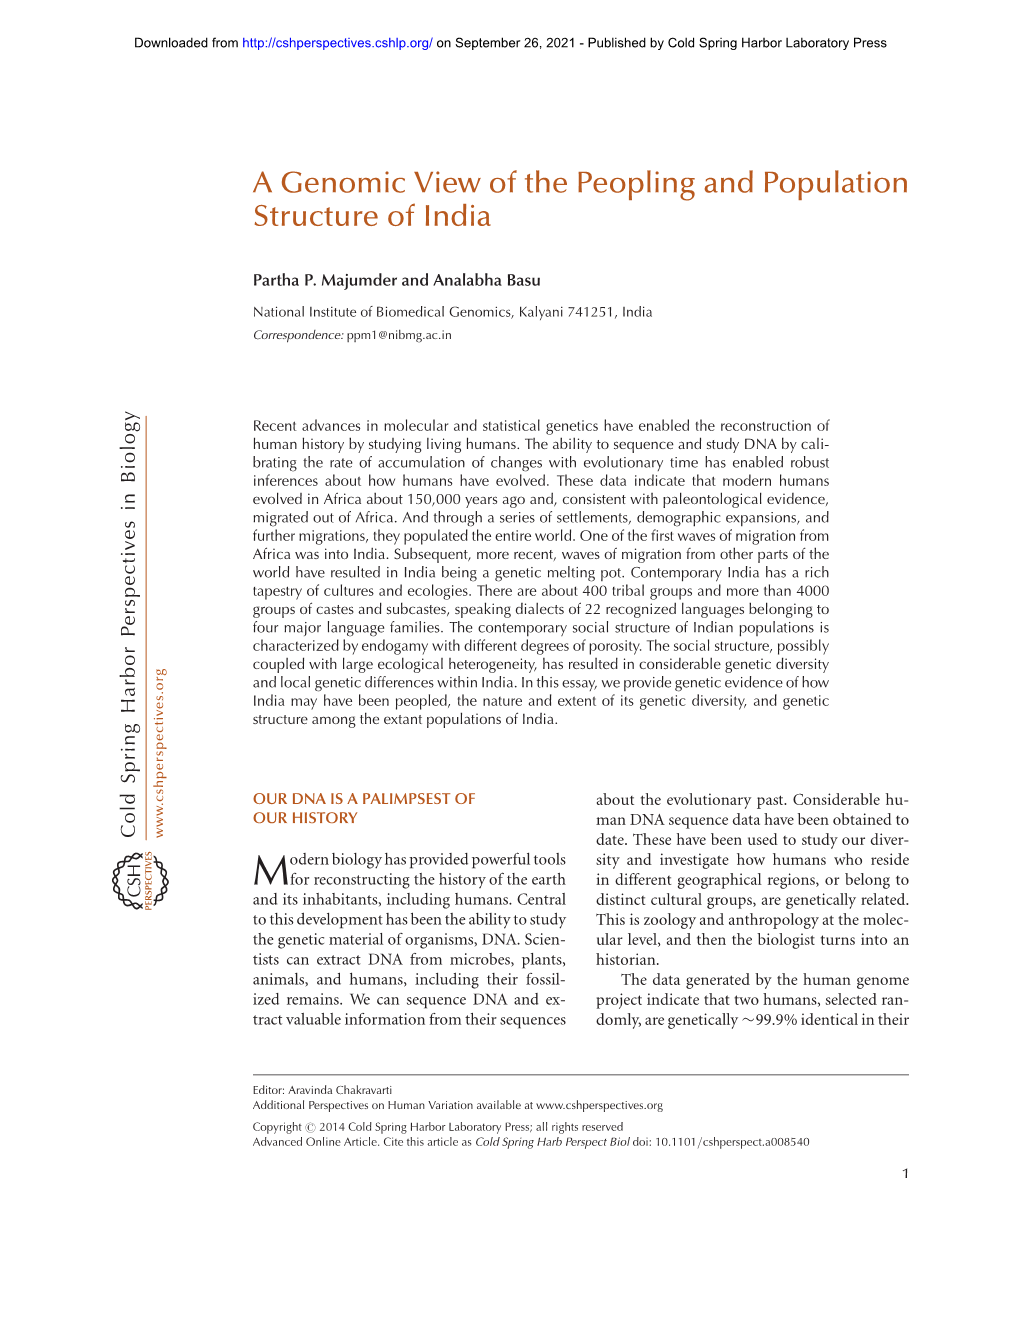 A Genomic View of the Peopling and Population Structure of India